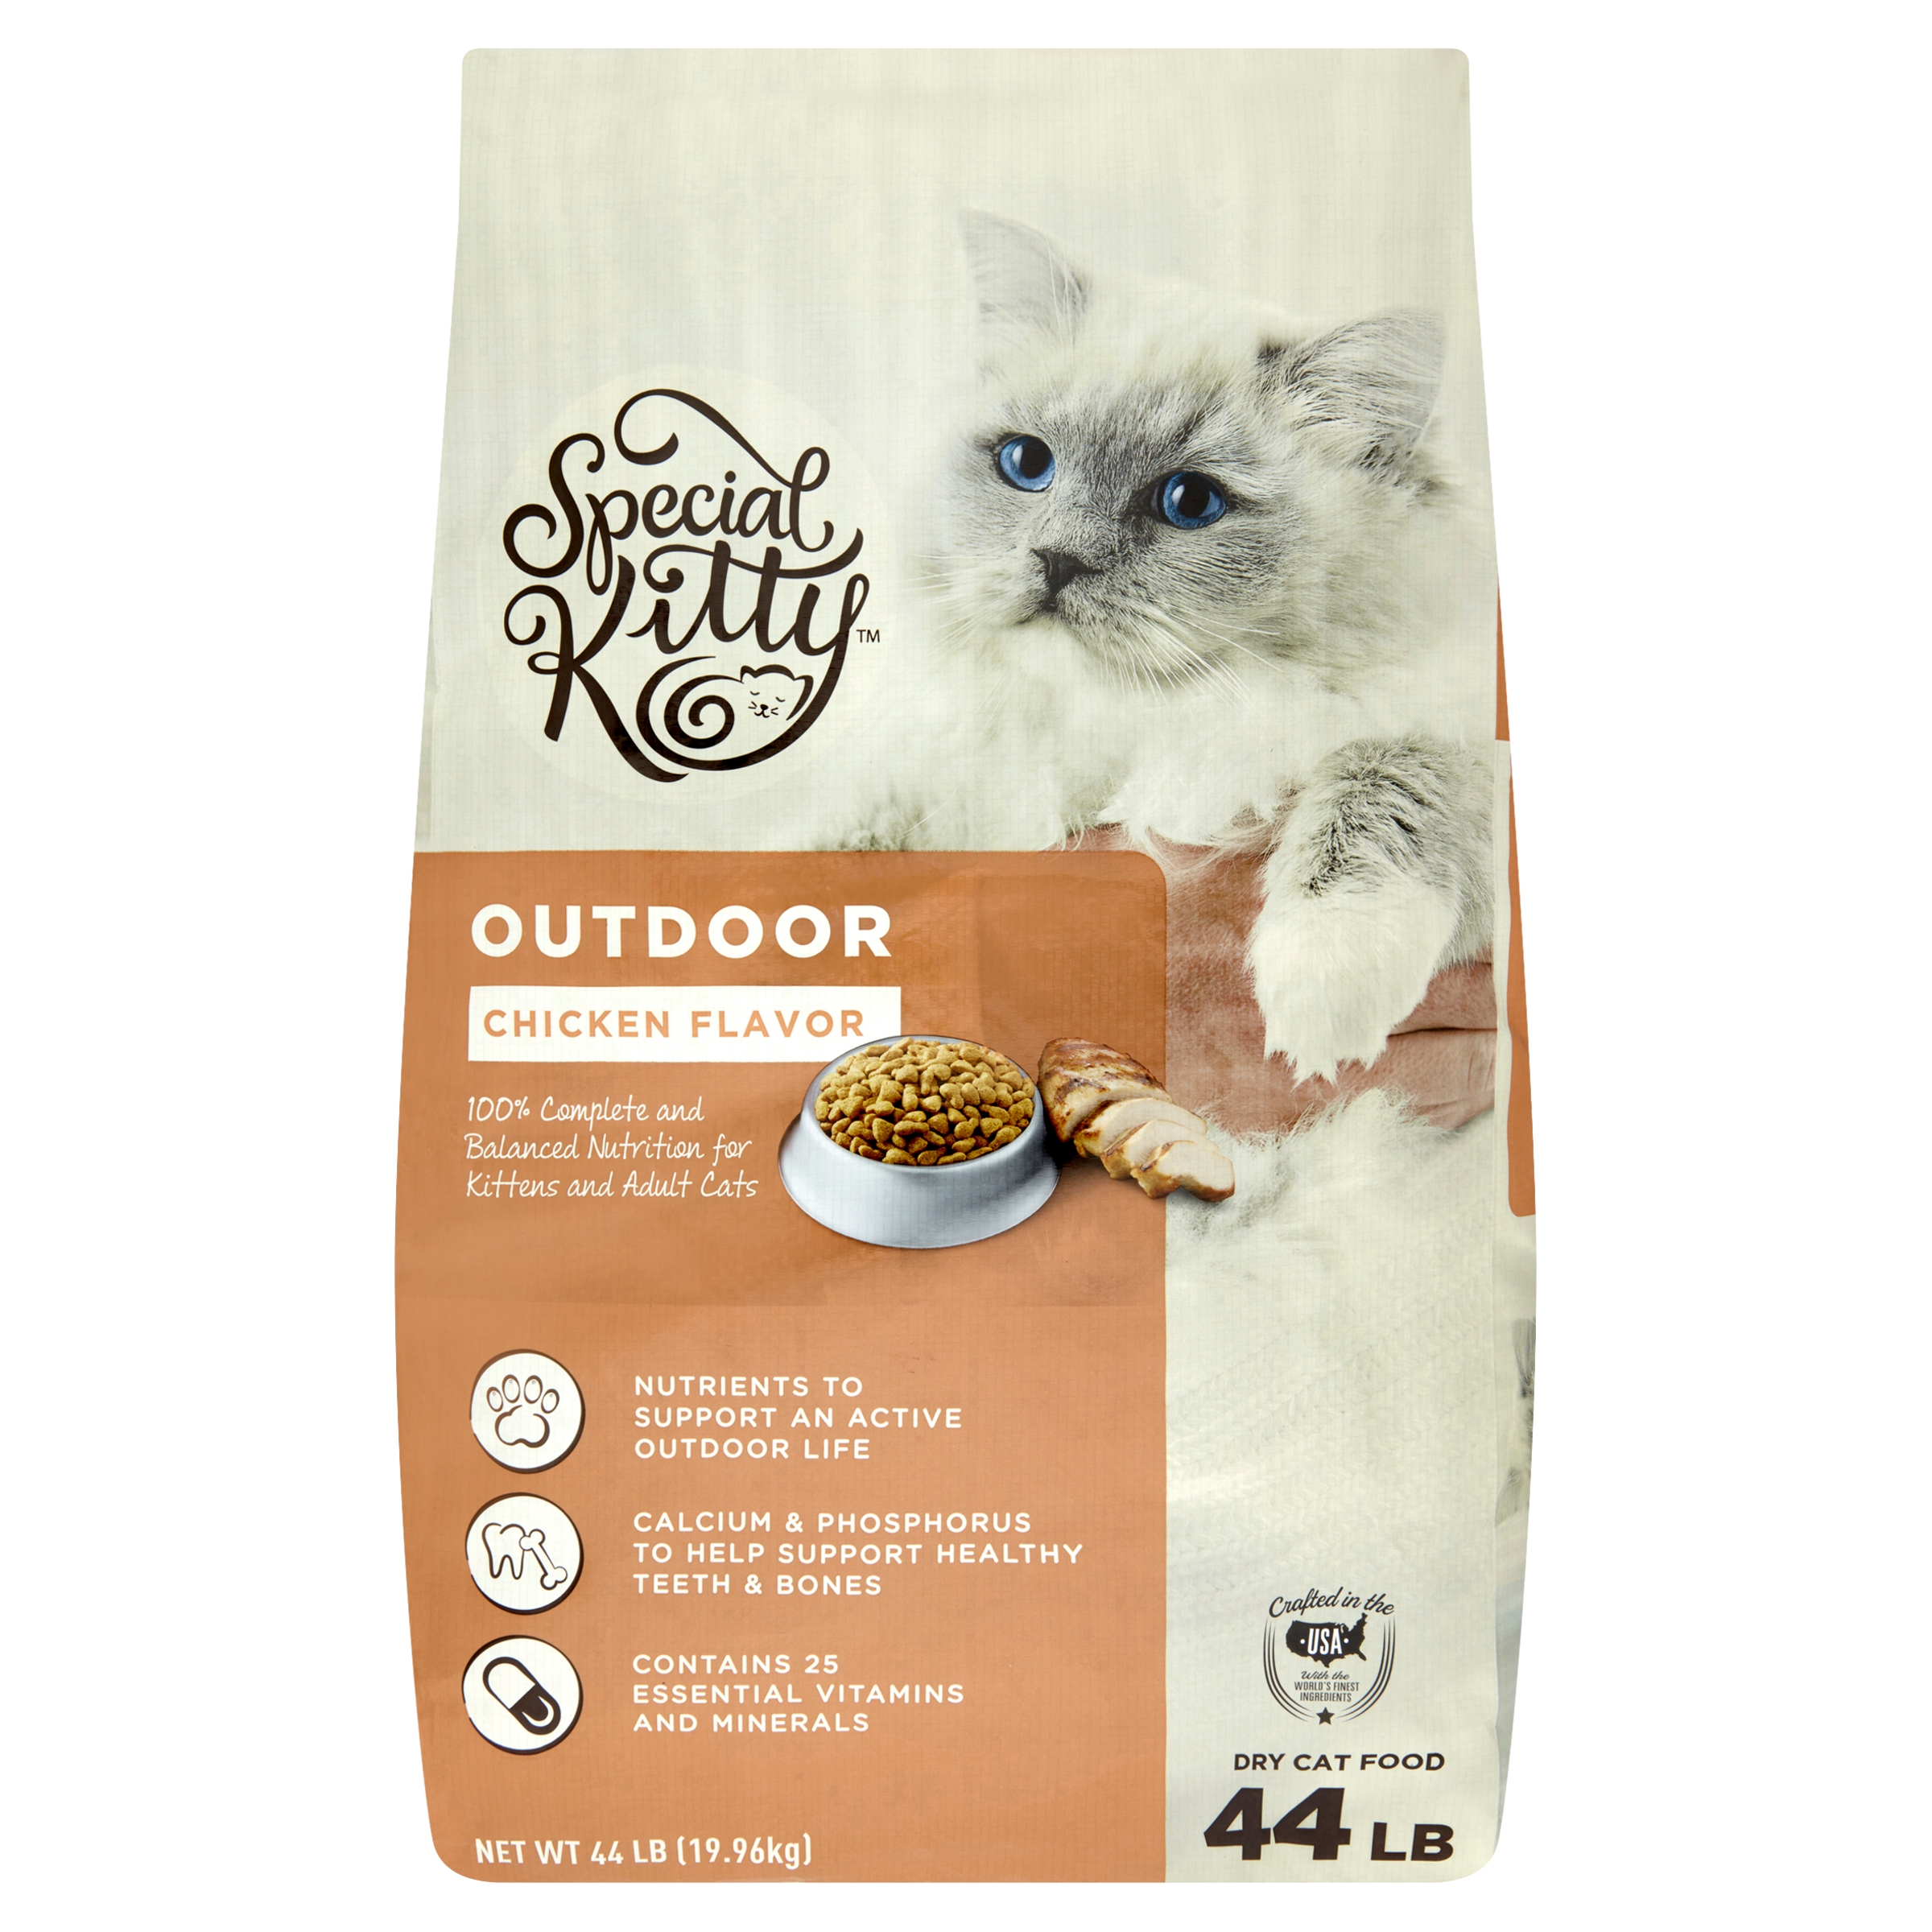 Special Kitty Outdoor Formula Dry Cat Food, 44 lb - image 1 of 9